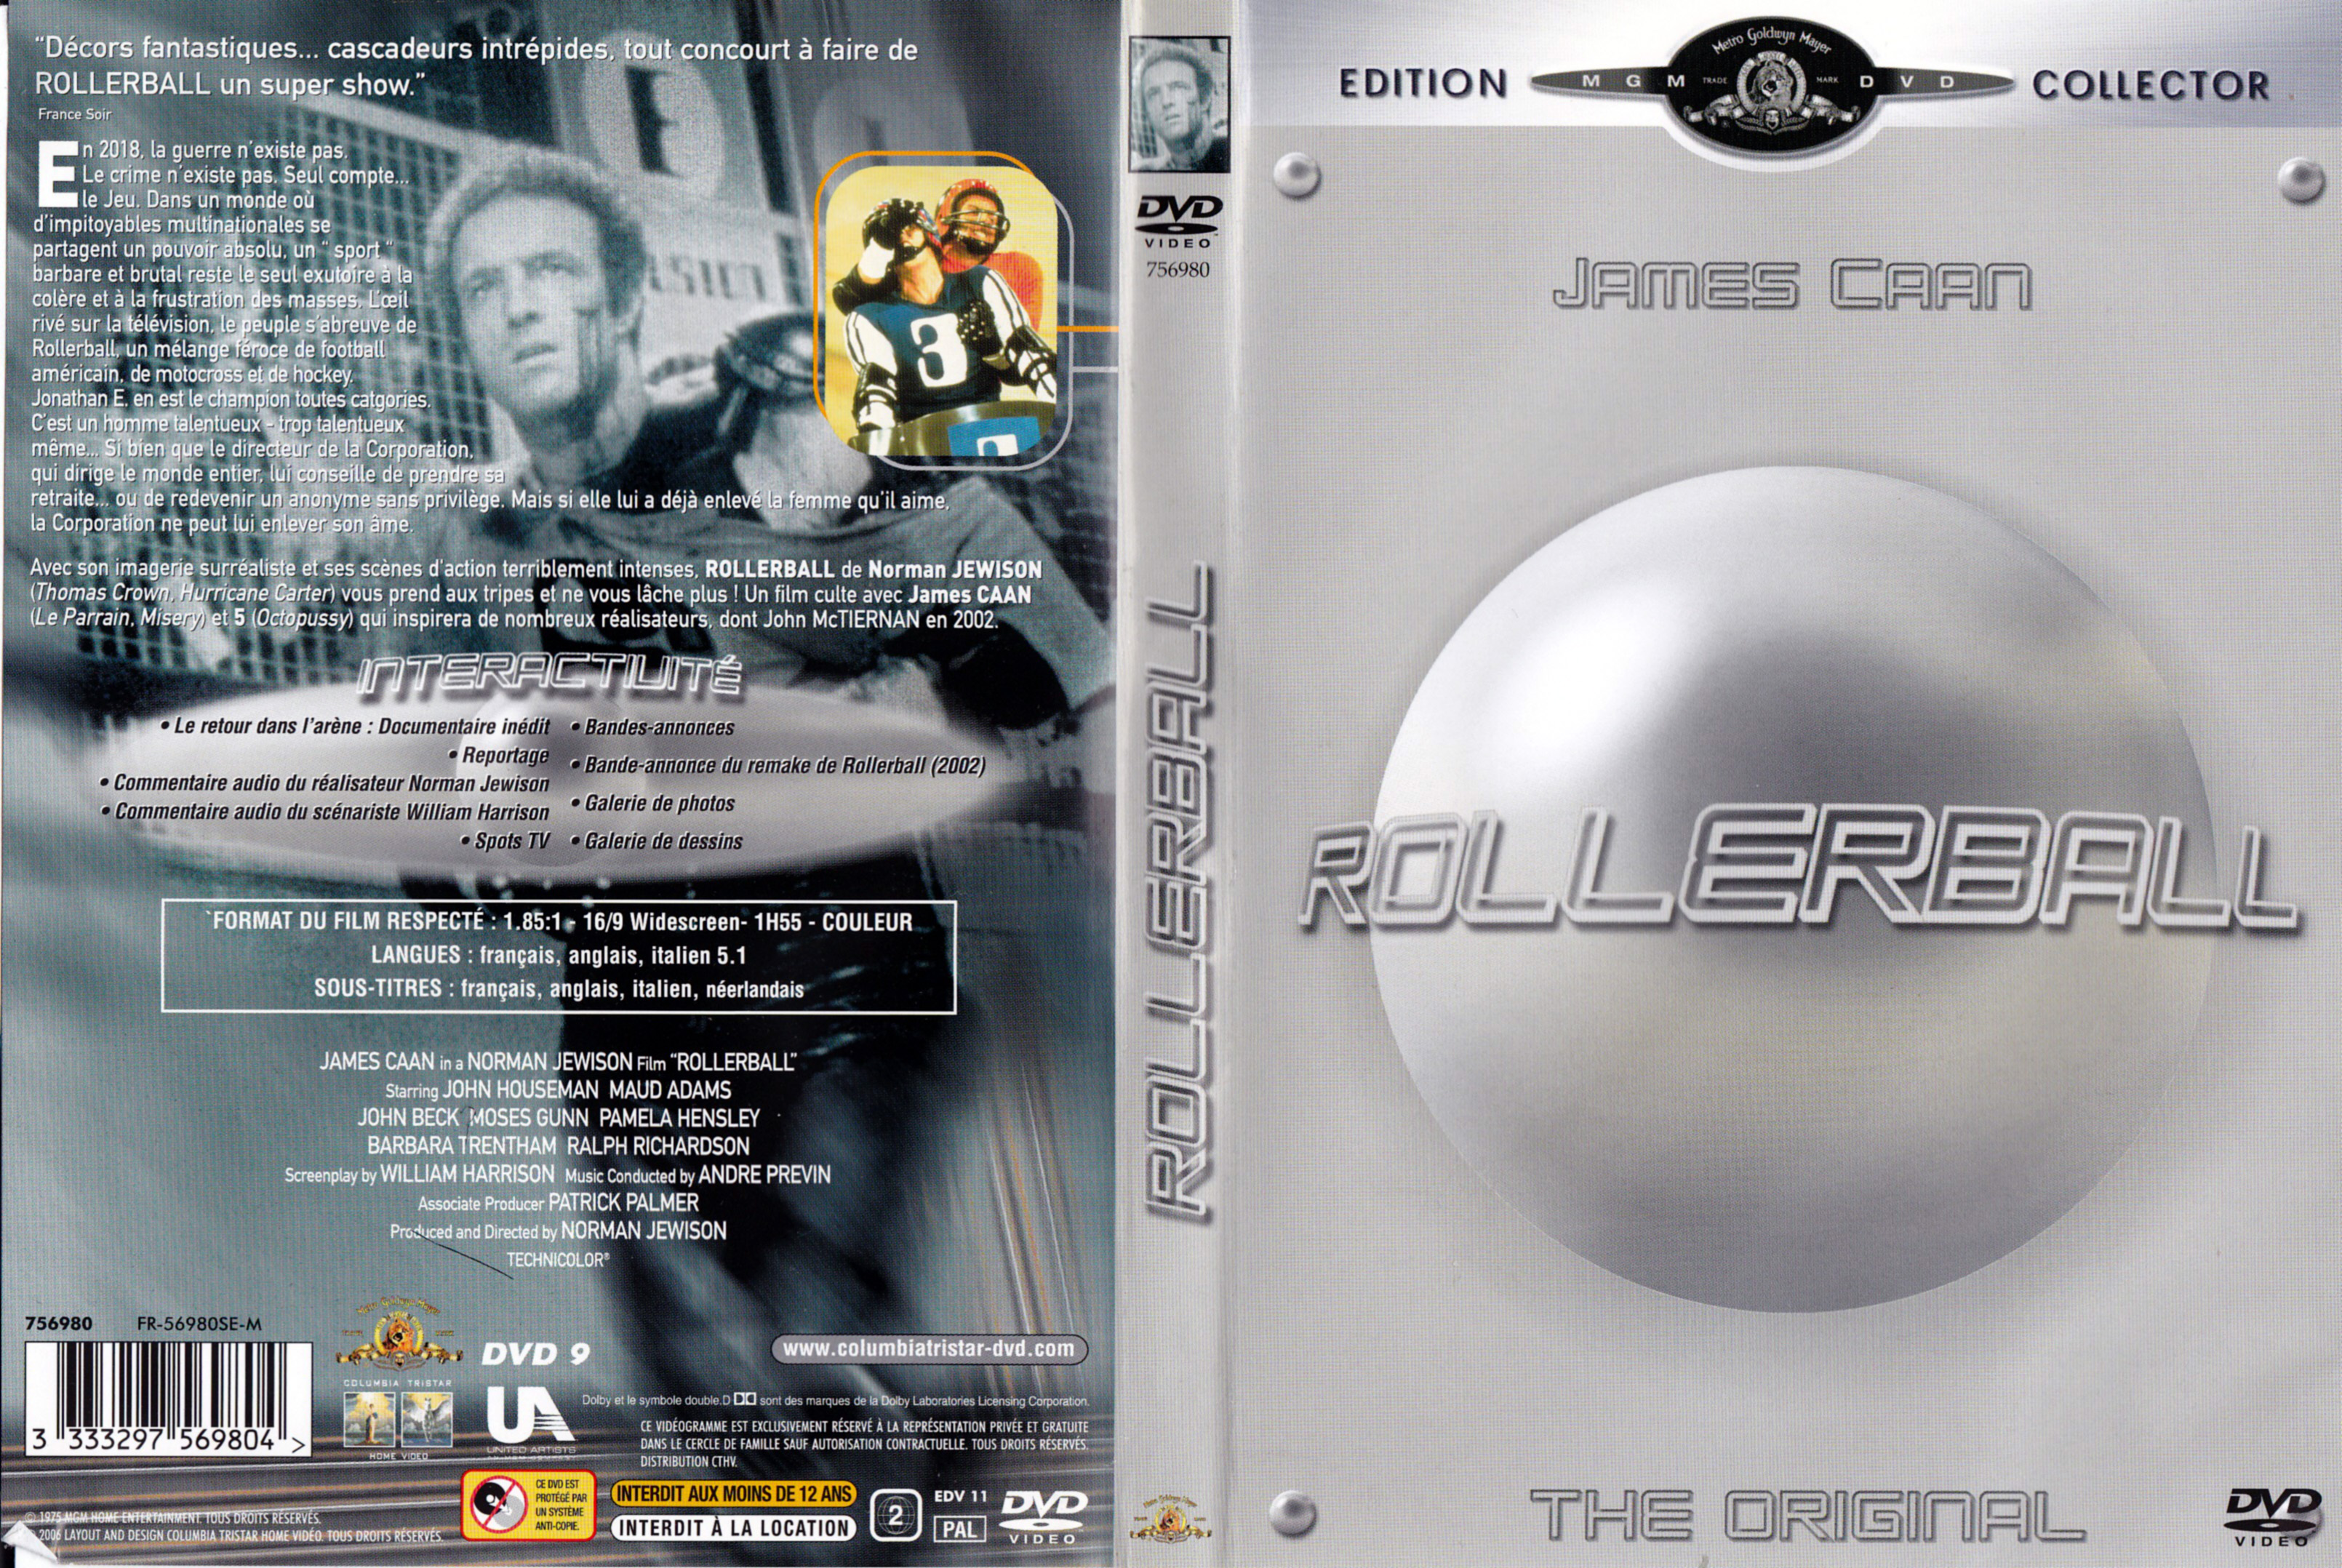 Jaquette DVD Rollerball v3